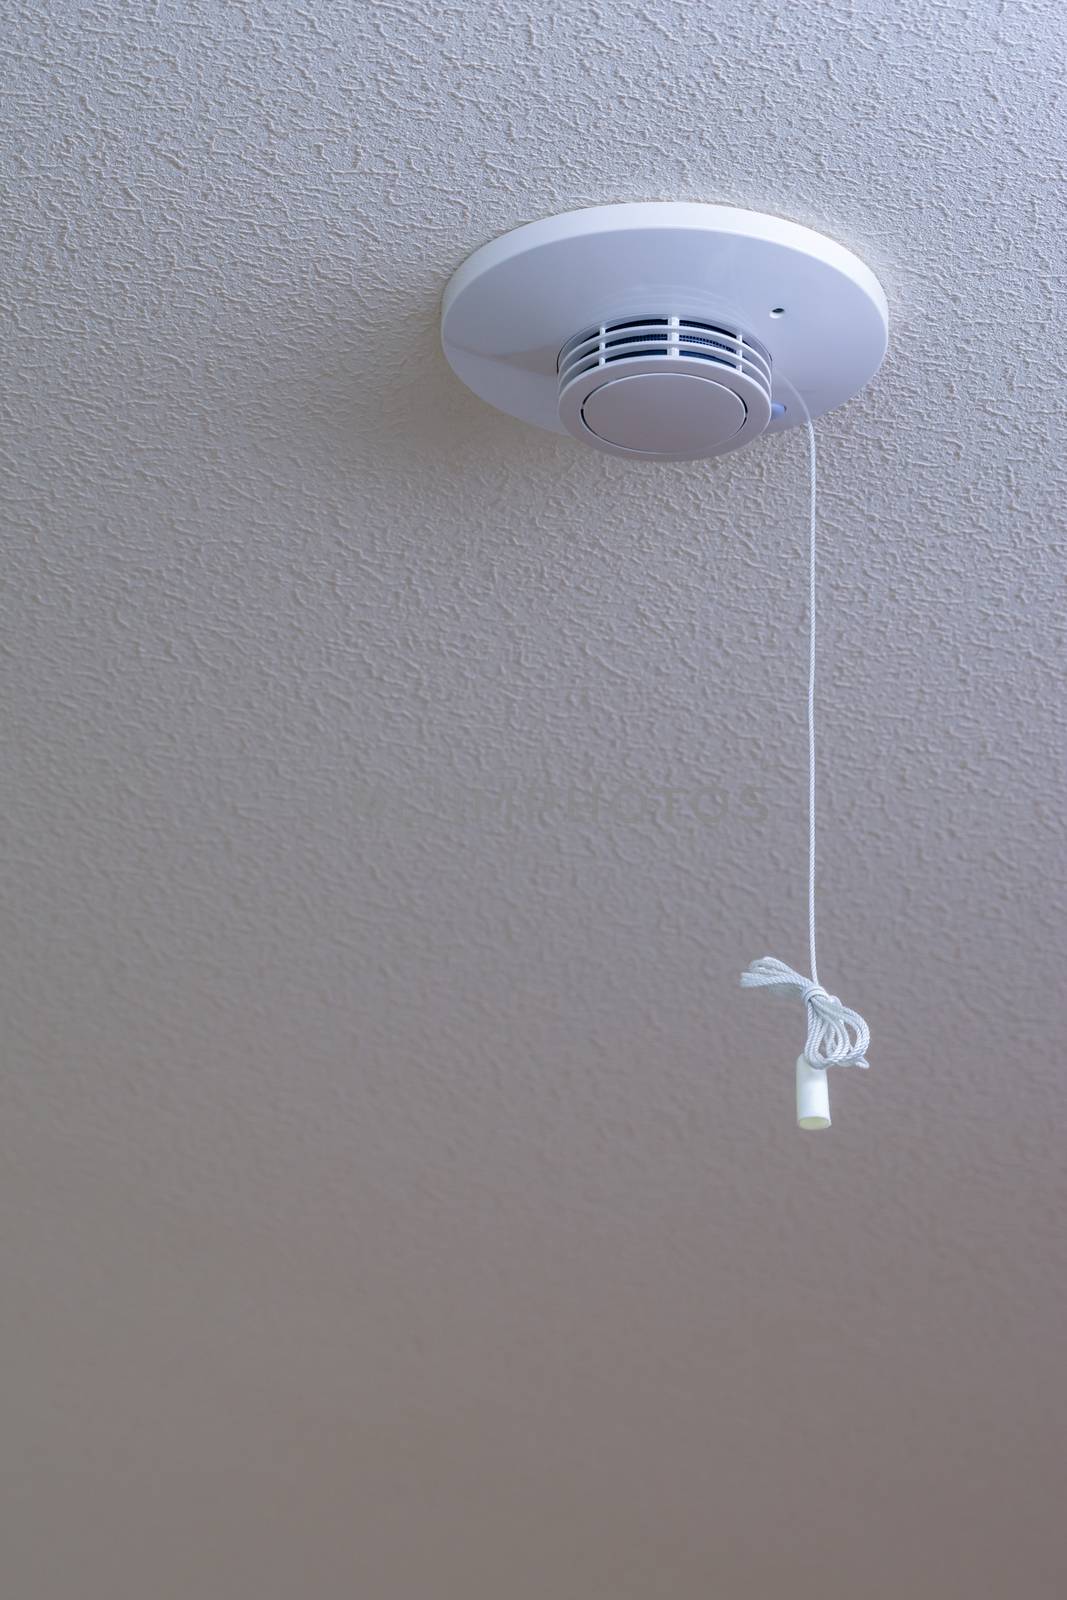 A white fire alarm on a textured white ceiling.